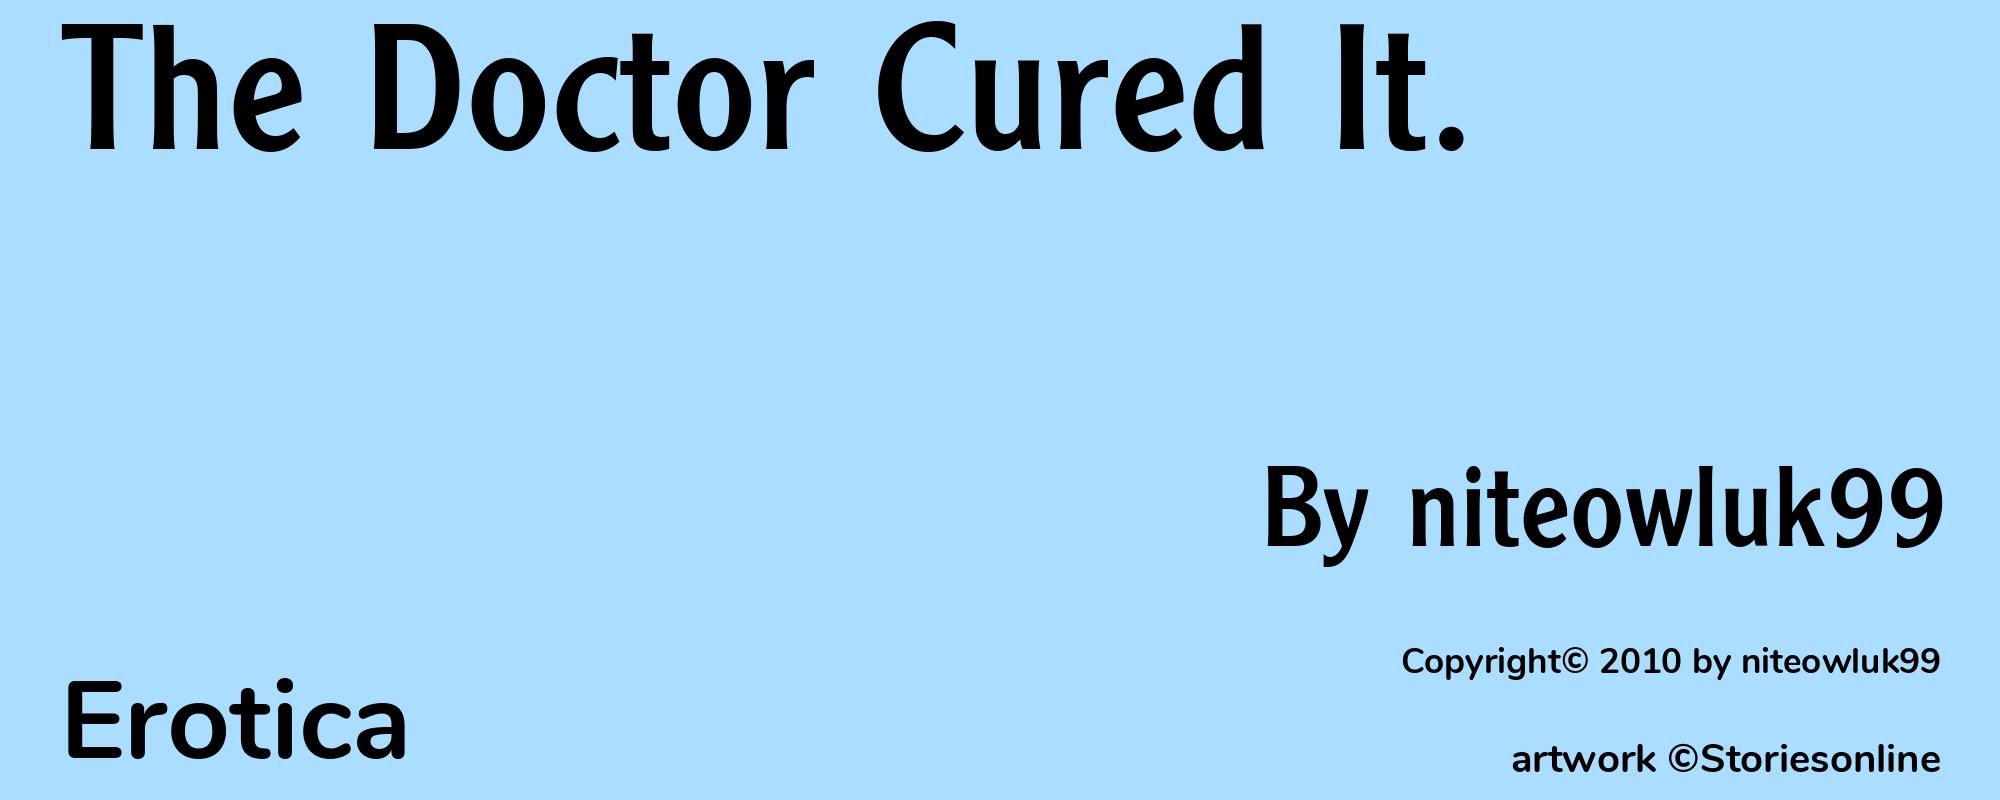 The Doctor Cured It. - Cover